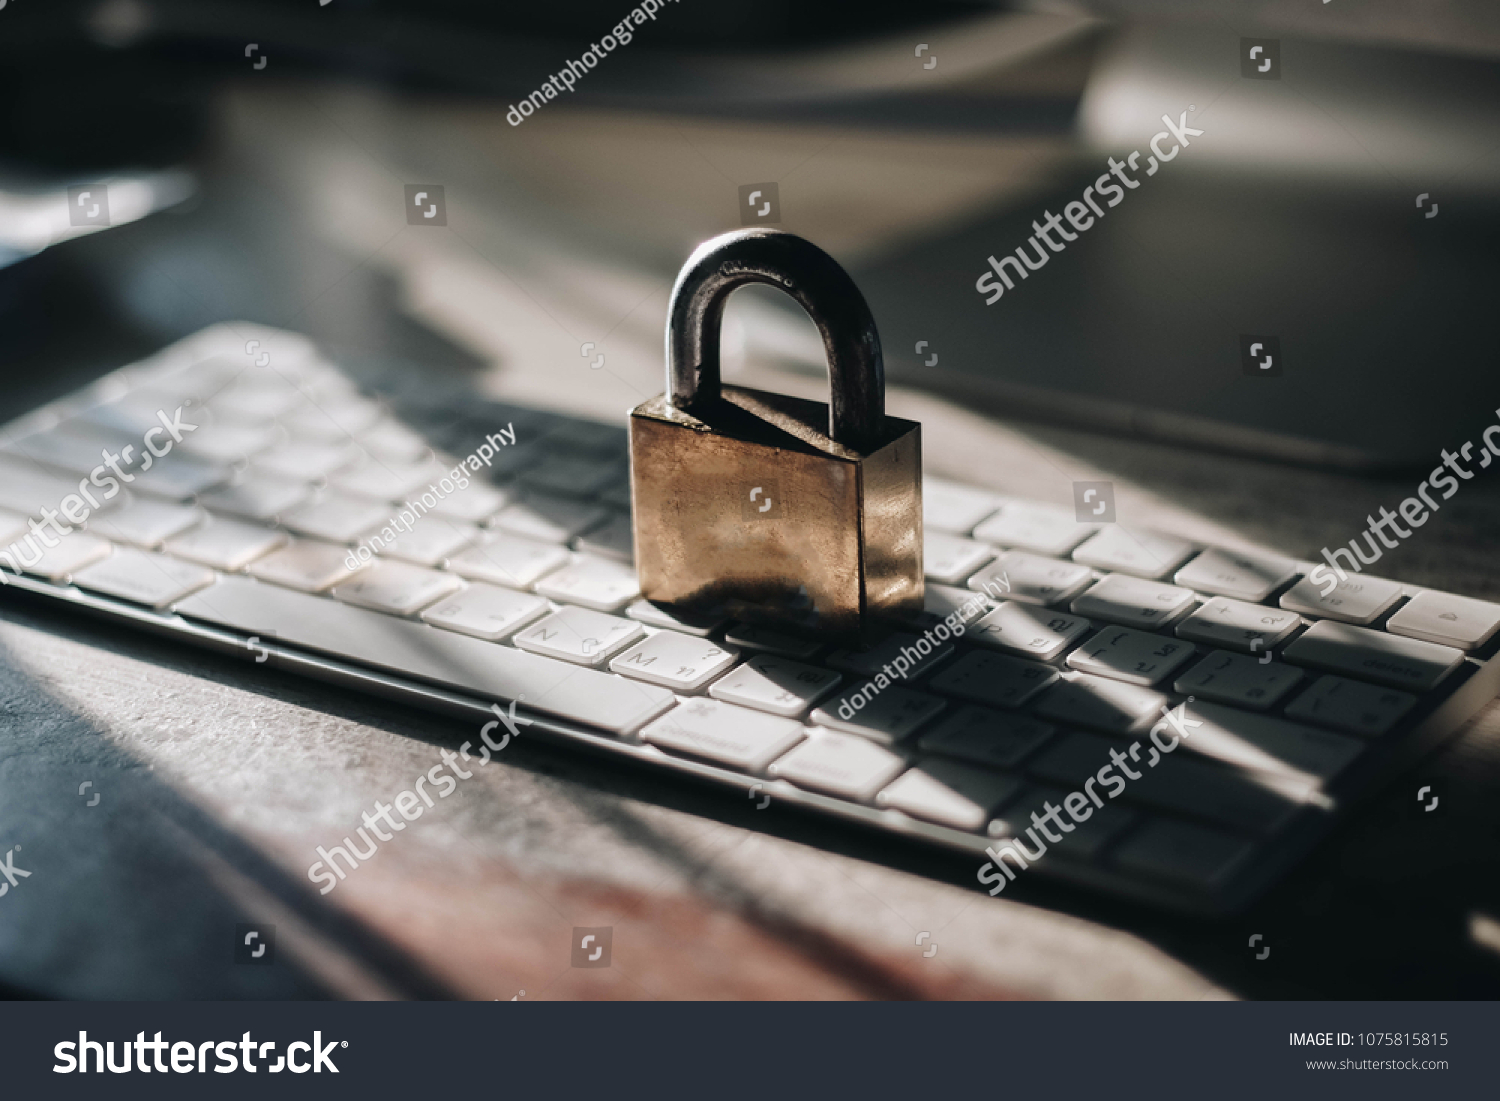 Computer security concept with a closed padlock on the keyboard #1075815815